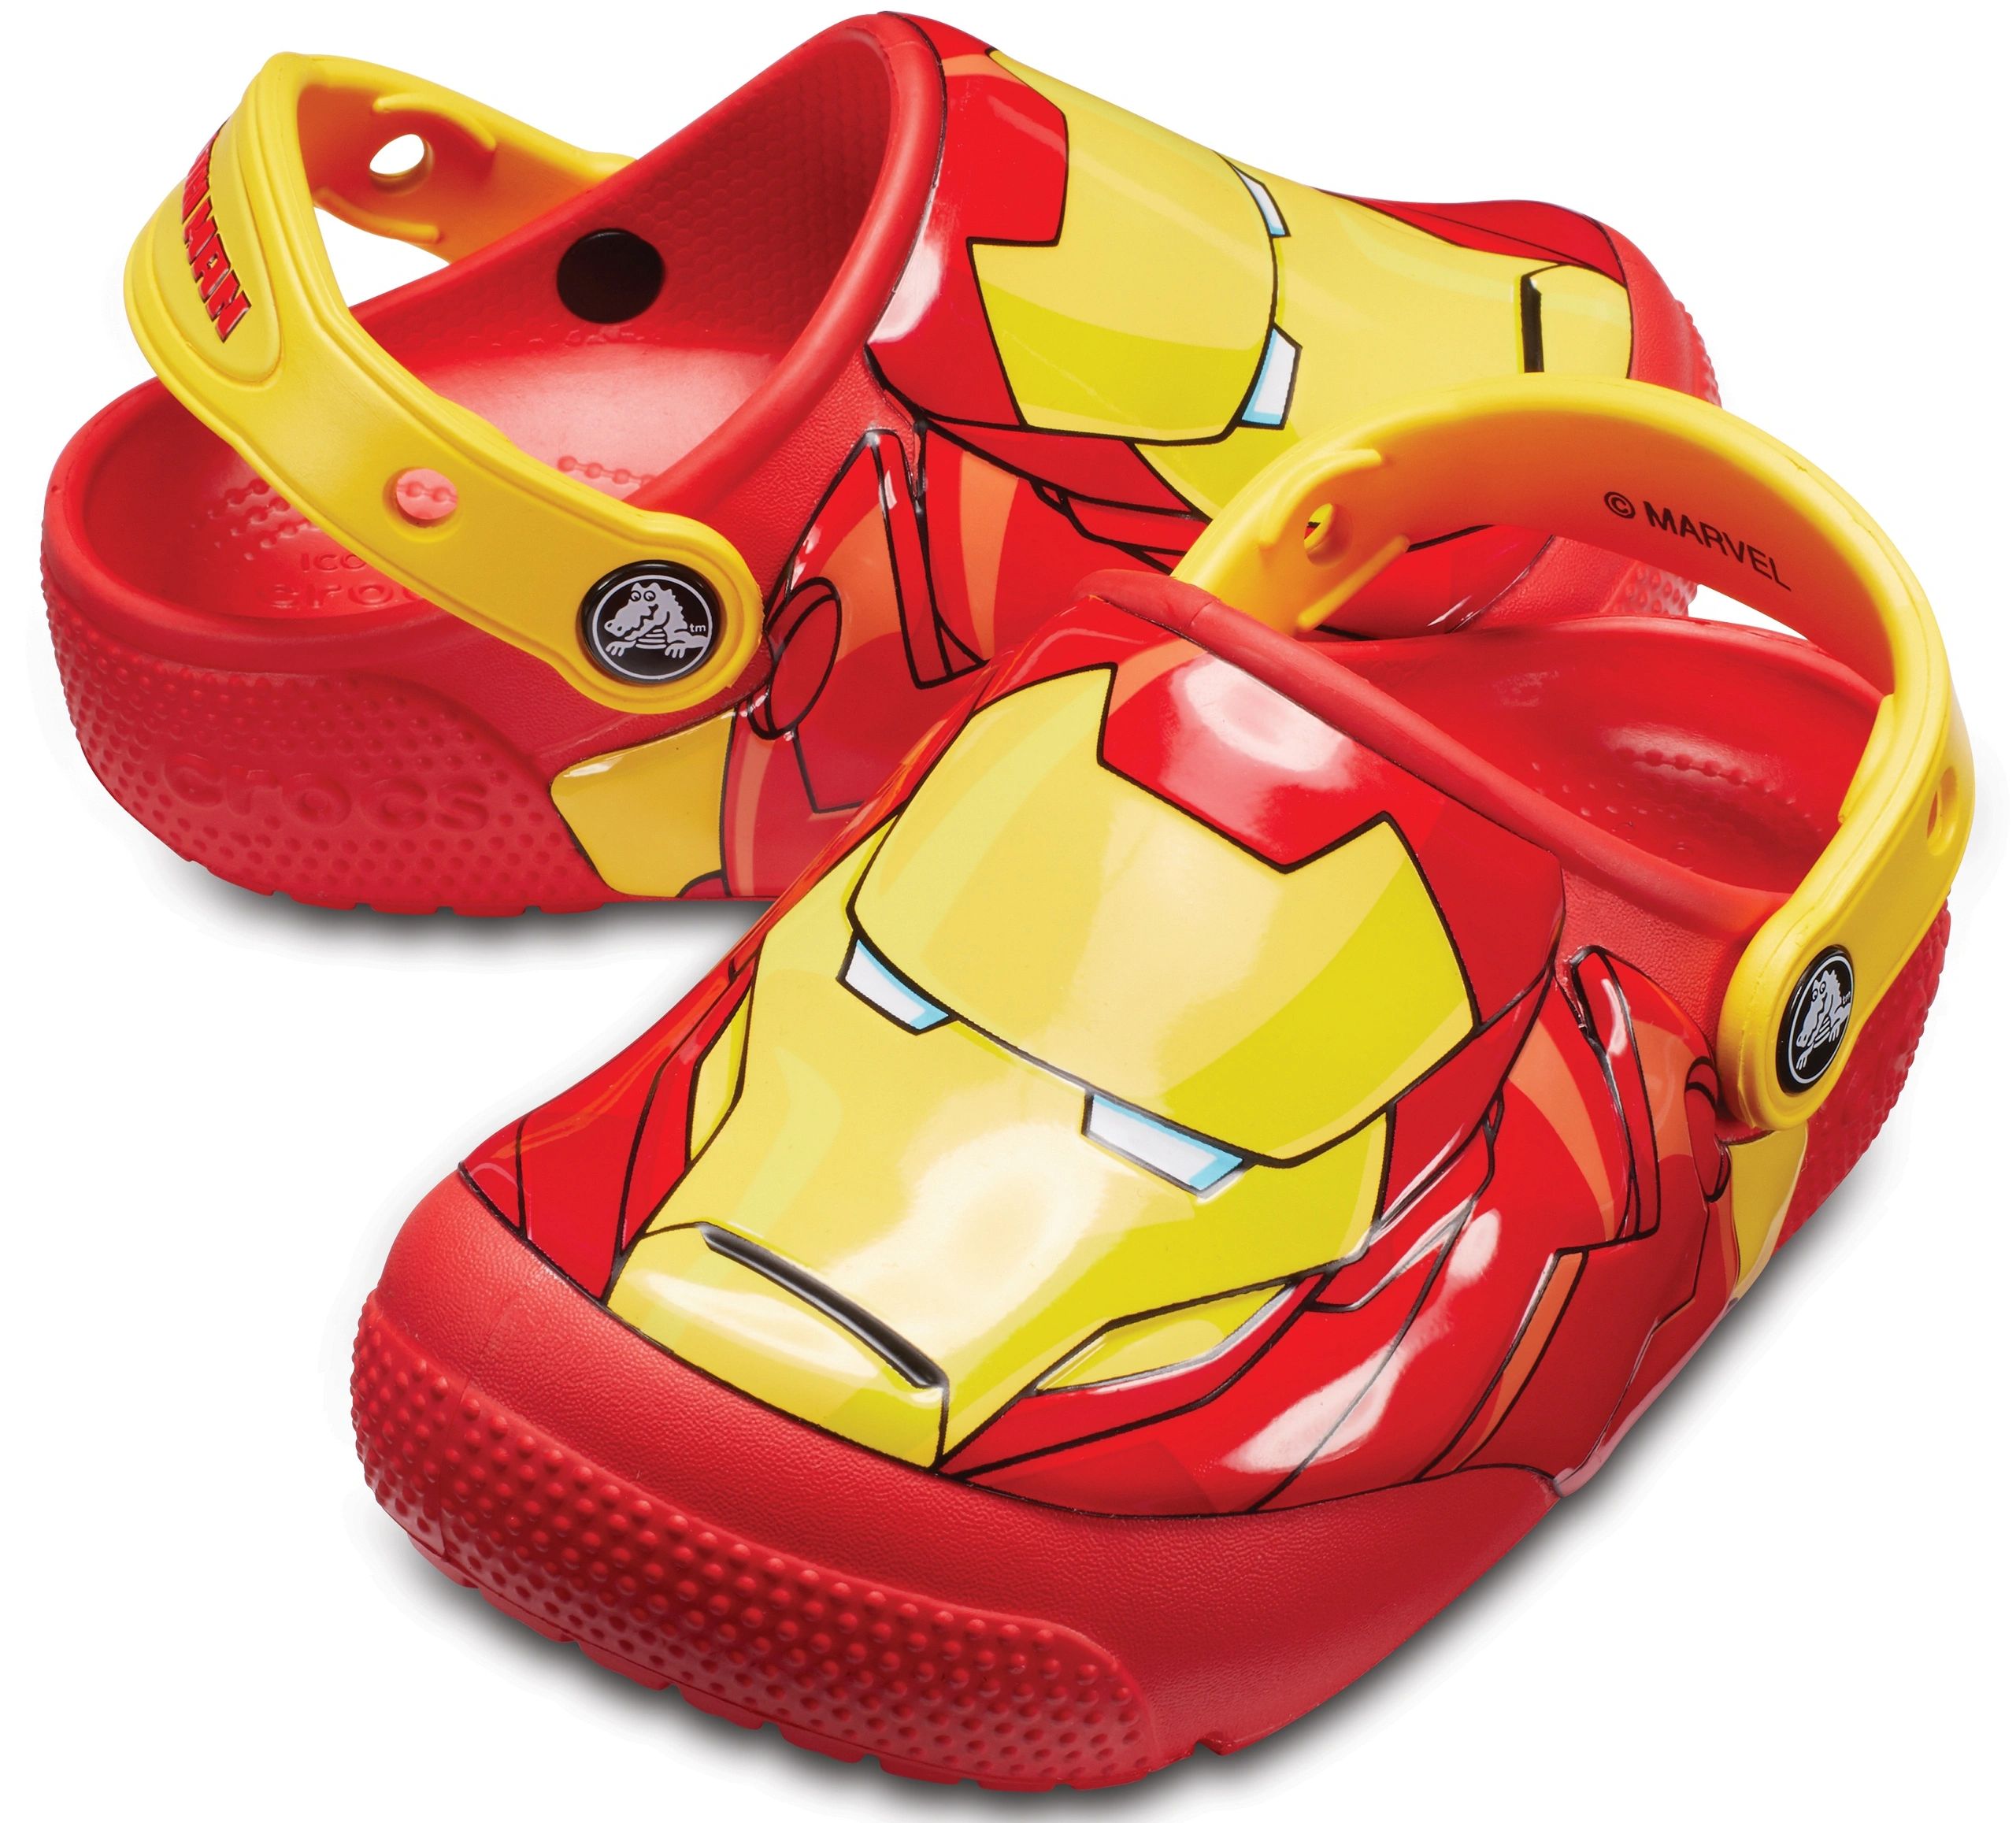 AVENGERS COLLECTION OF FOOTWEAR FOR KIDS